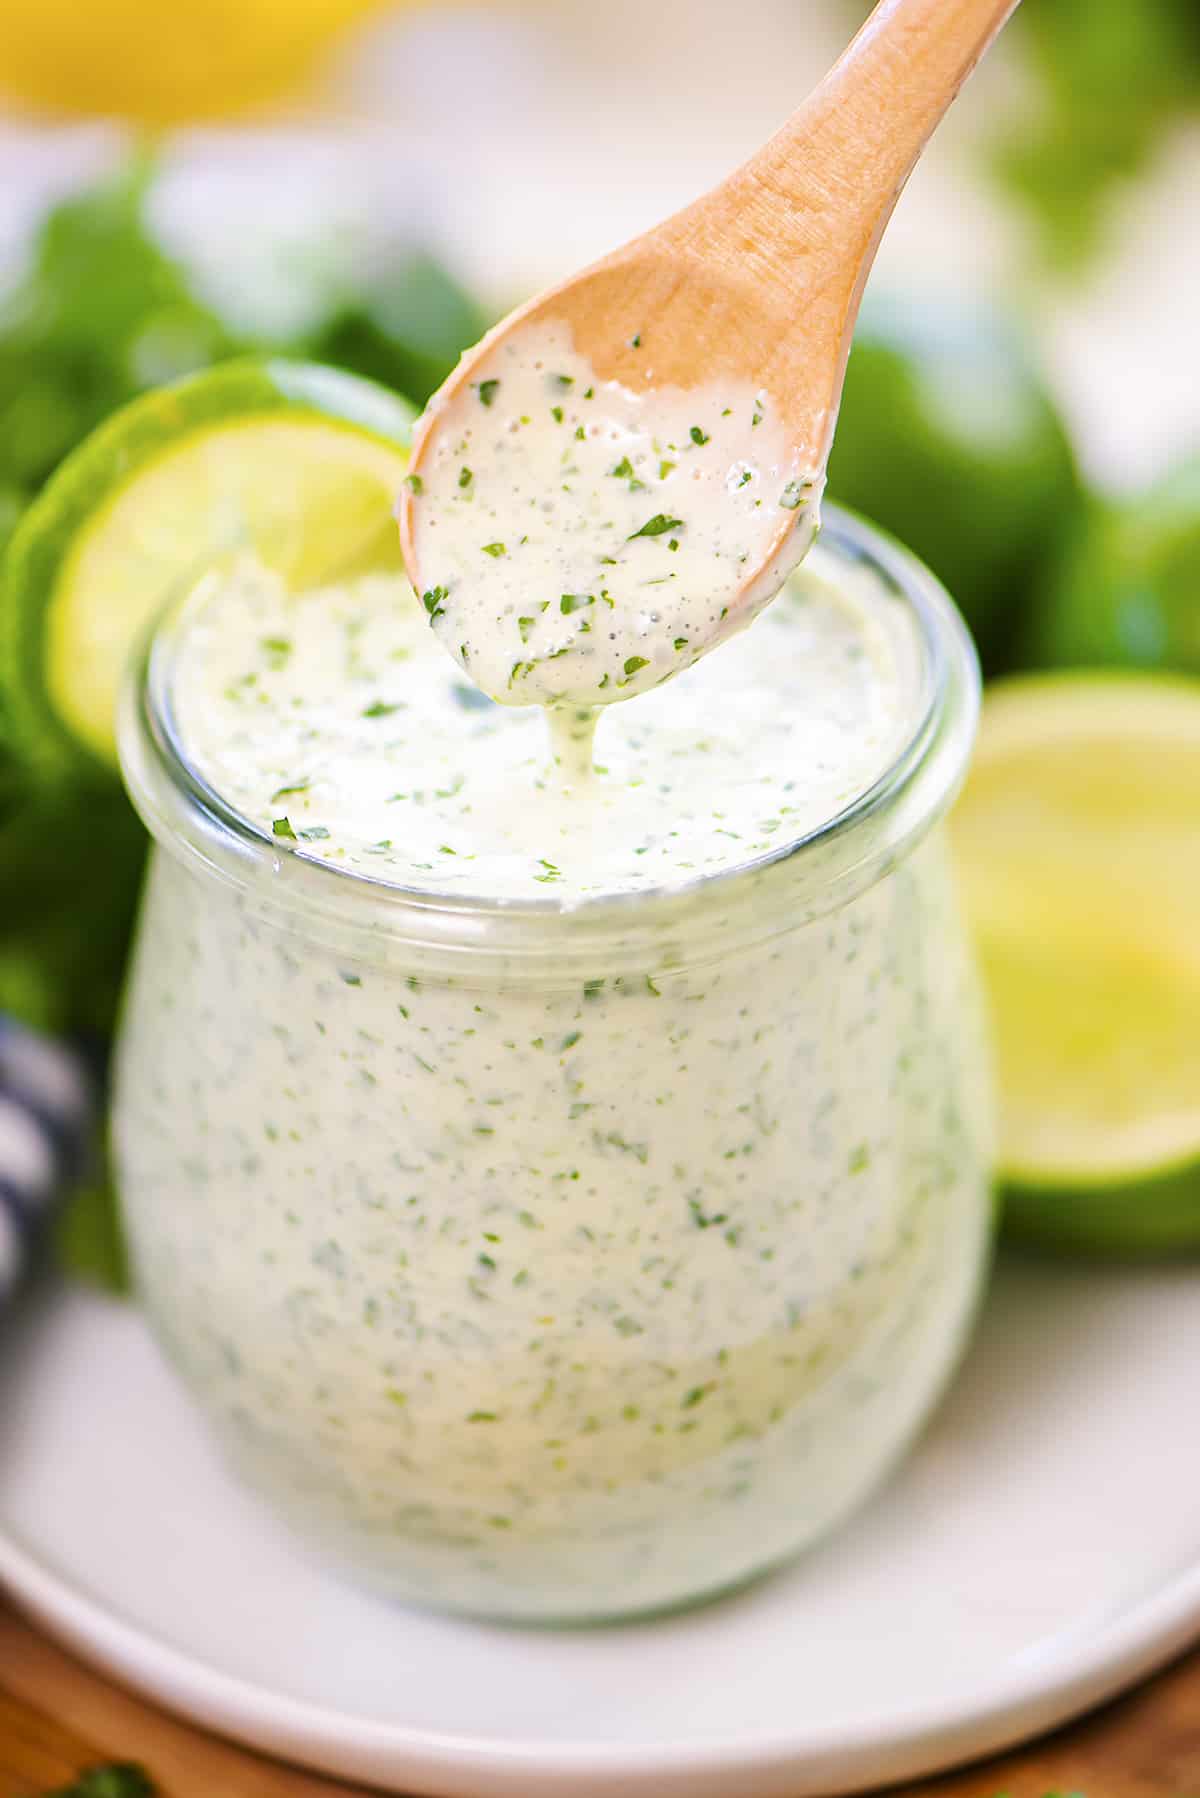 Spoon being dipped in a jar of cilantro lime dressing.